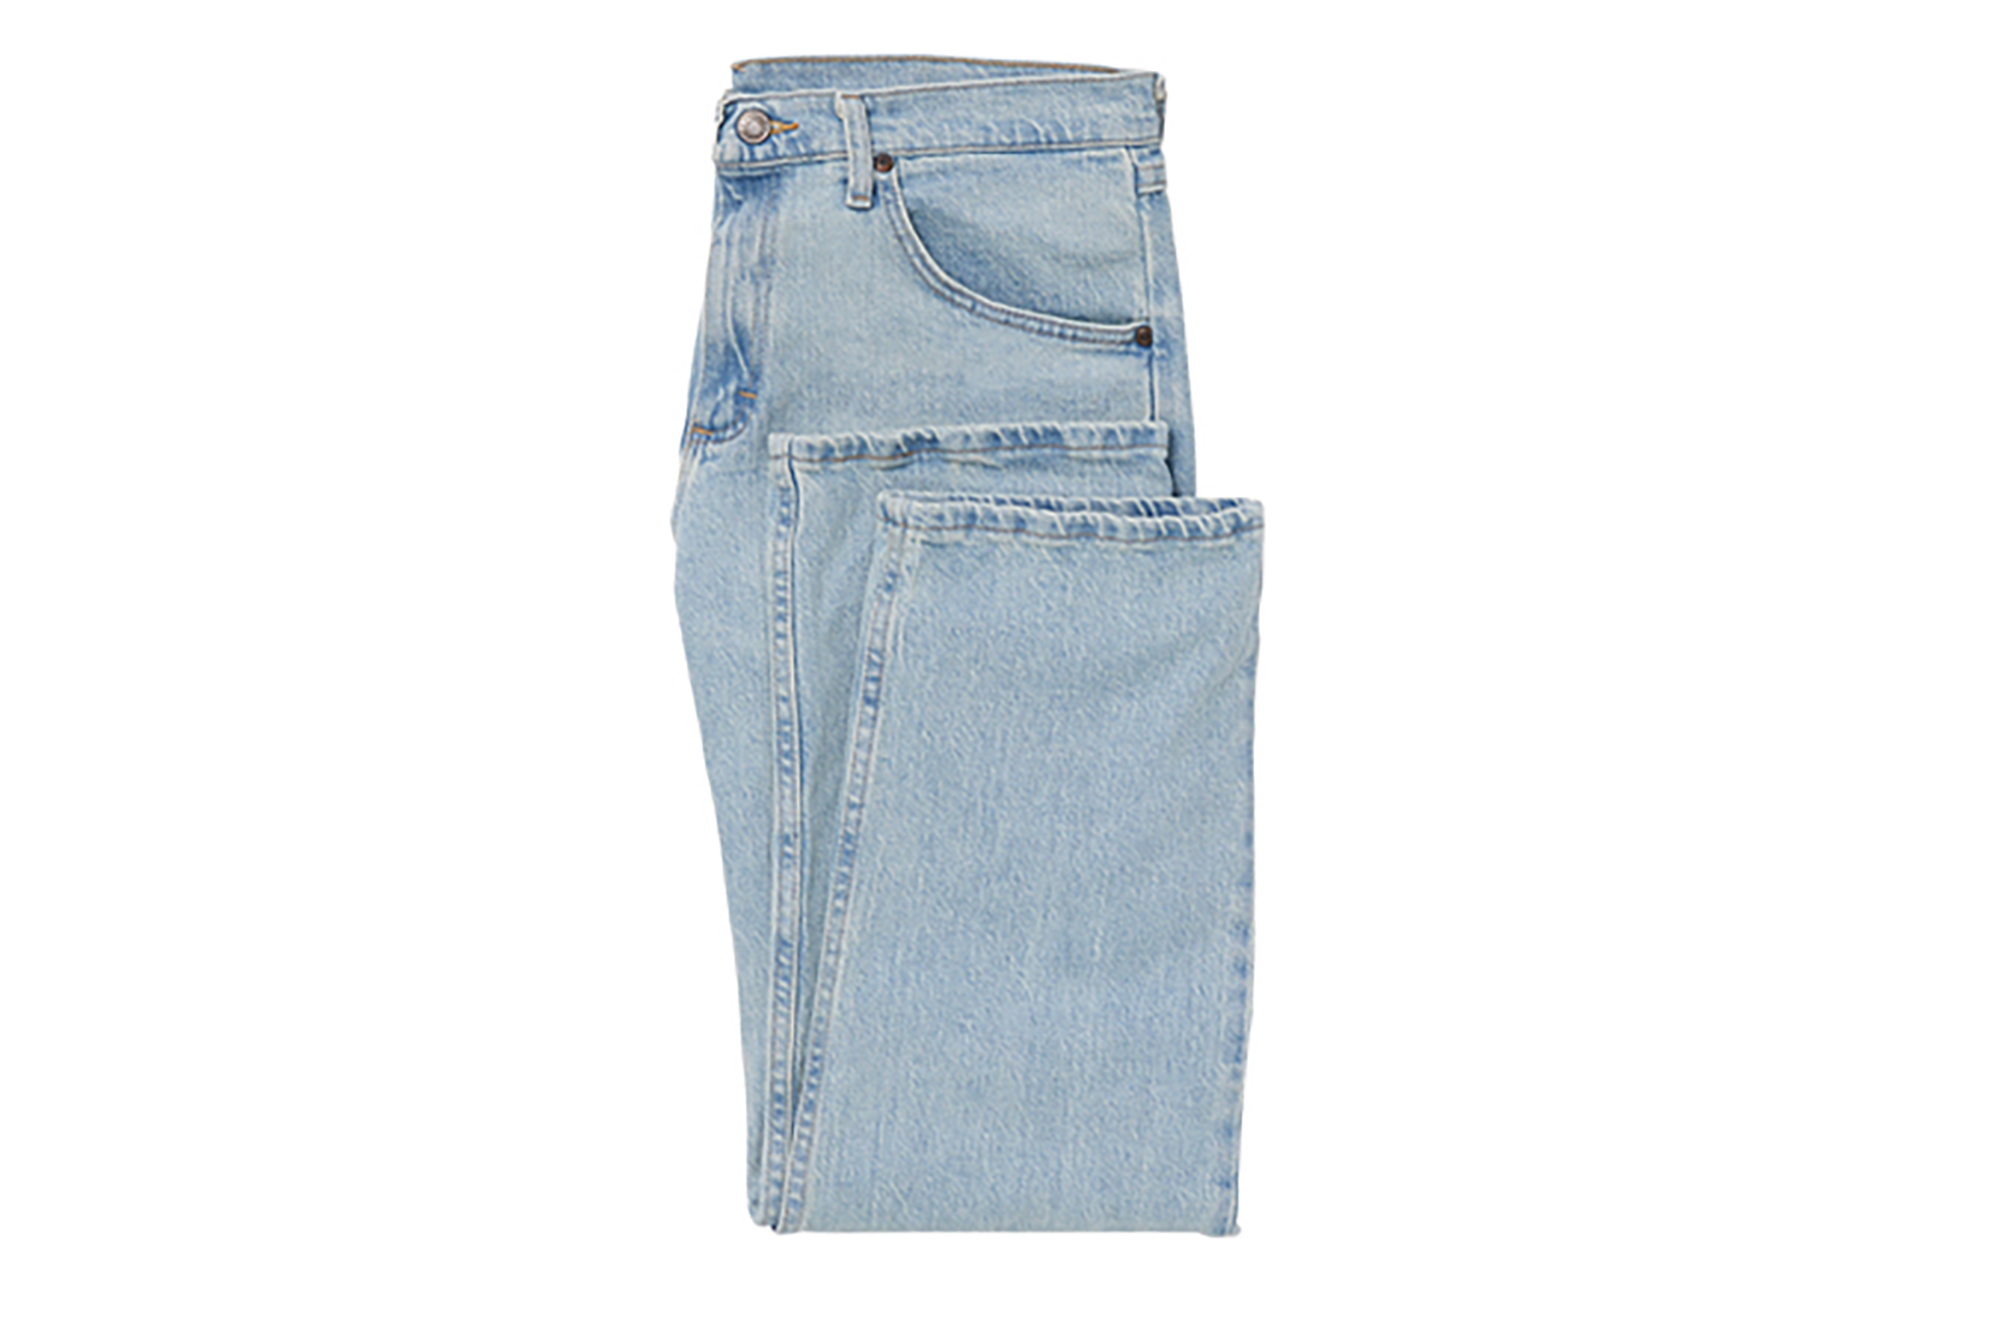 A pair of mens jeans 